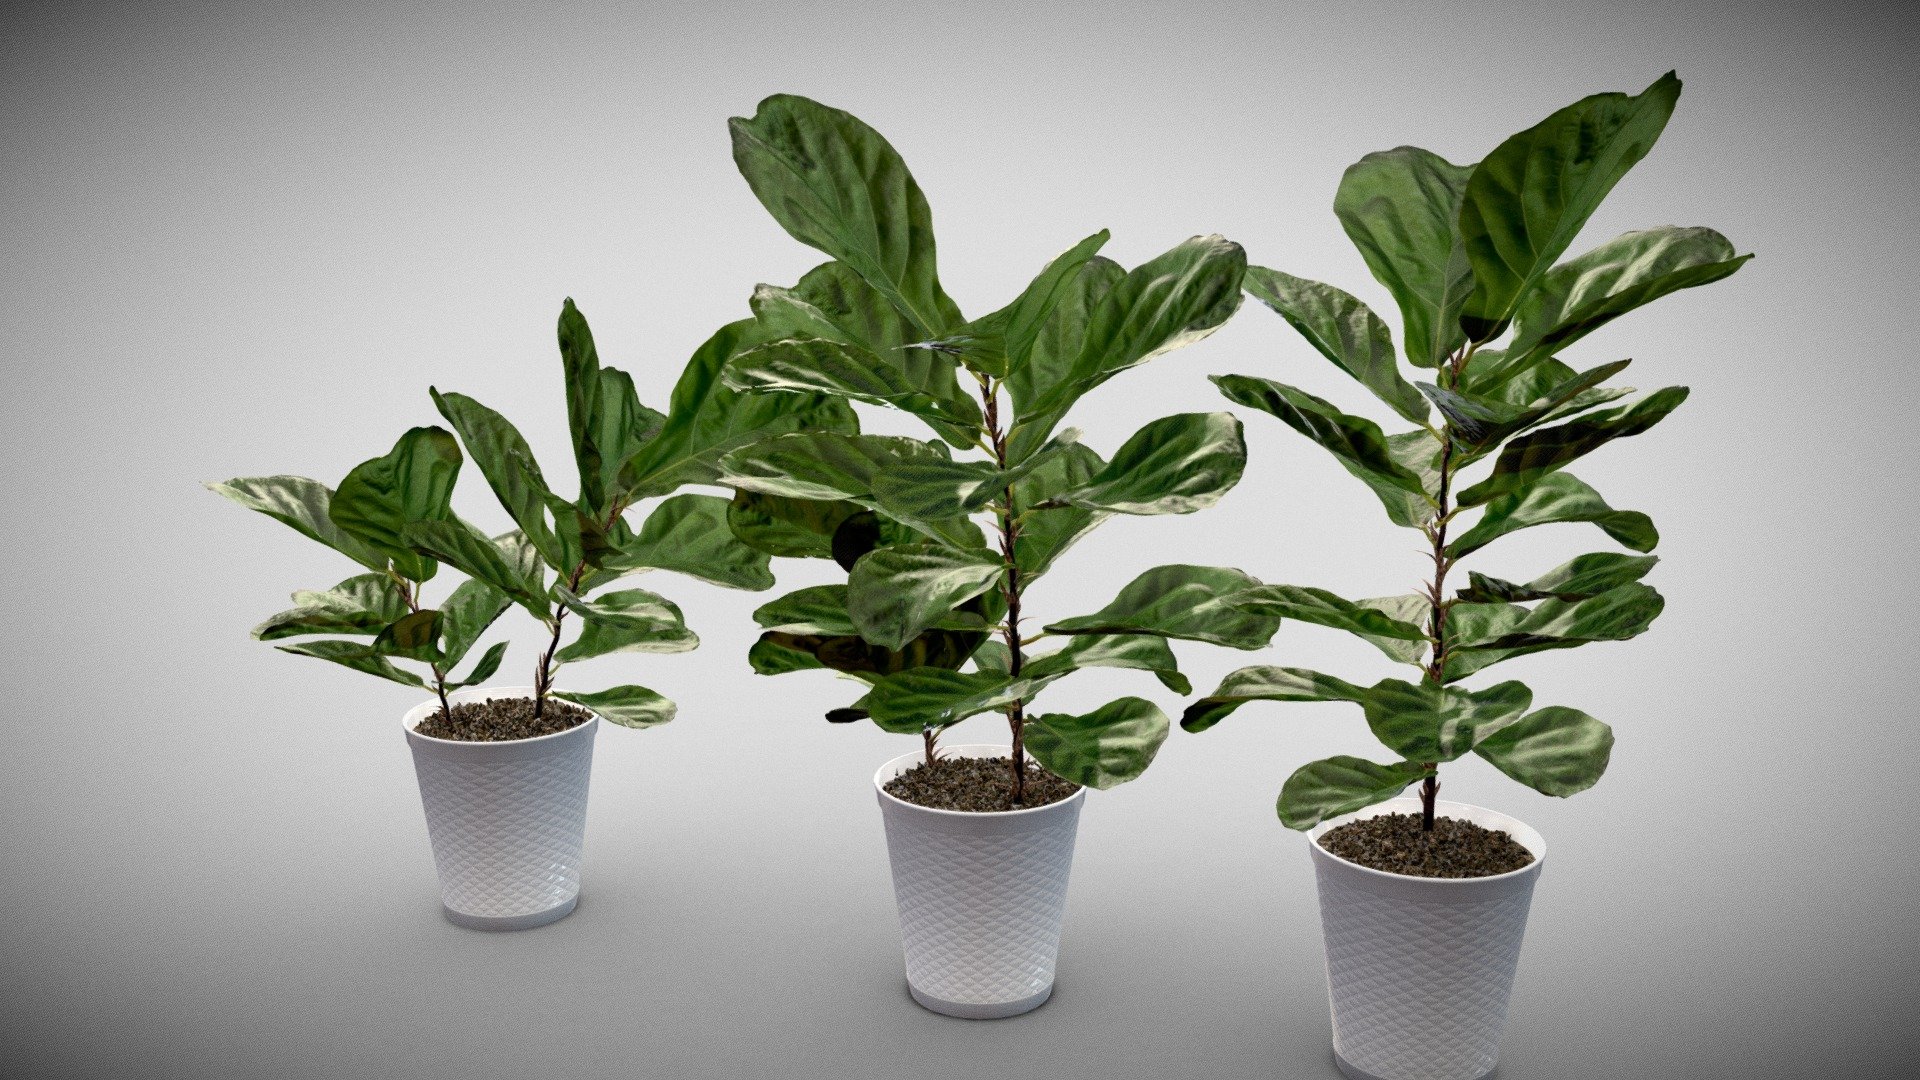 Fiddle leaf fig plants (5 plants) in 3 nice pots with a geometric accent.

The leaf was 3d scanned, baked to a clean mesh, and variations created. 

These plants have become popular as decor for home and office.

Large leaves witha unique shape make this variety beautiful.

TIF with alpha included
Normal map for leaf included, detailed stems and soil.

Perfect for any scene.

Download it for Personal and commercial use - Plant- Fiddle Leaf Fig-HD - Buy Royalty Free 3D model by rdashkevicz 3d model